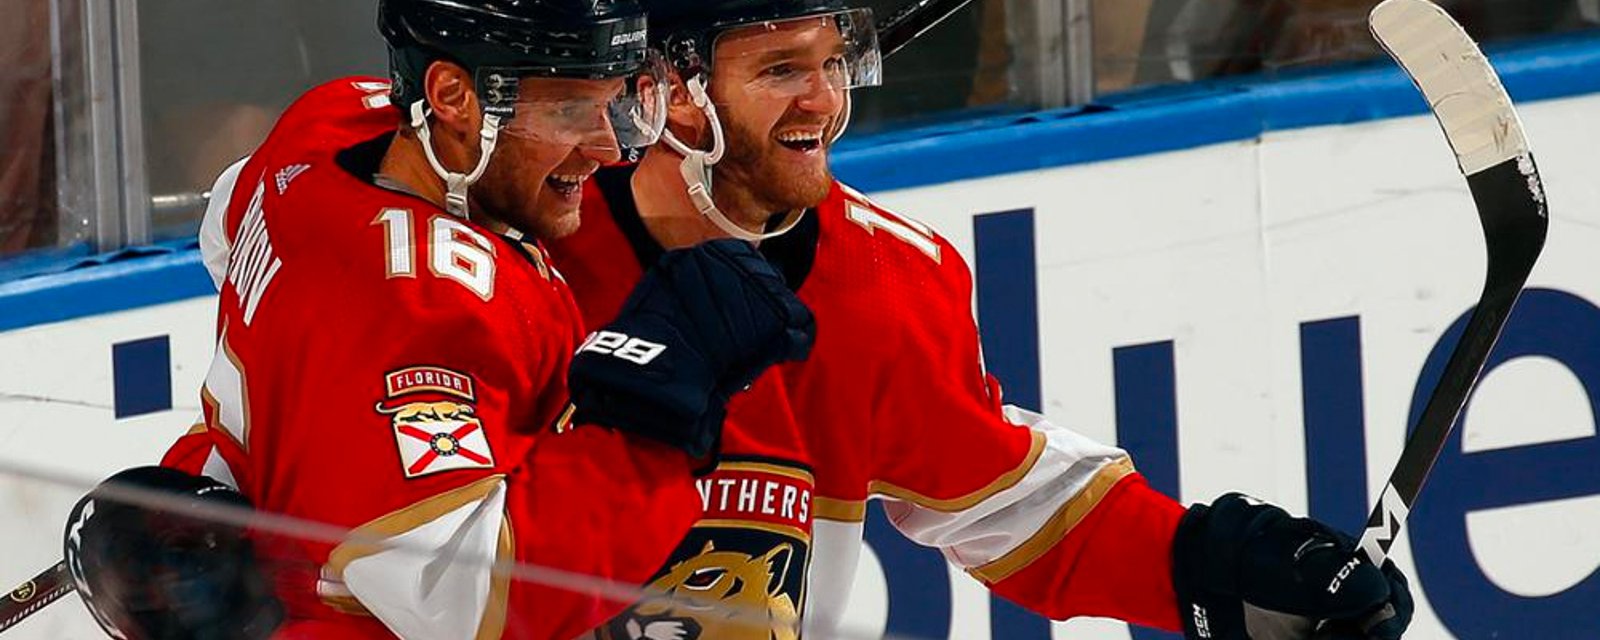 Huberdeau and Barkov hook up on an absolutely nasty goal